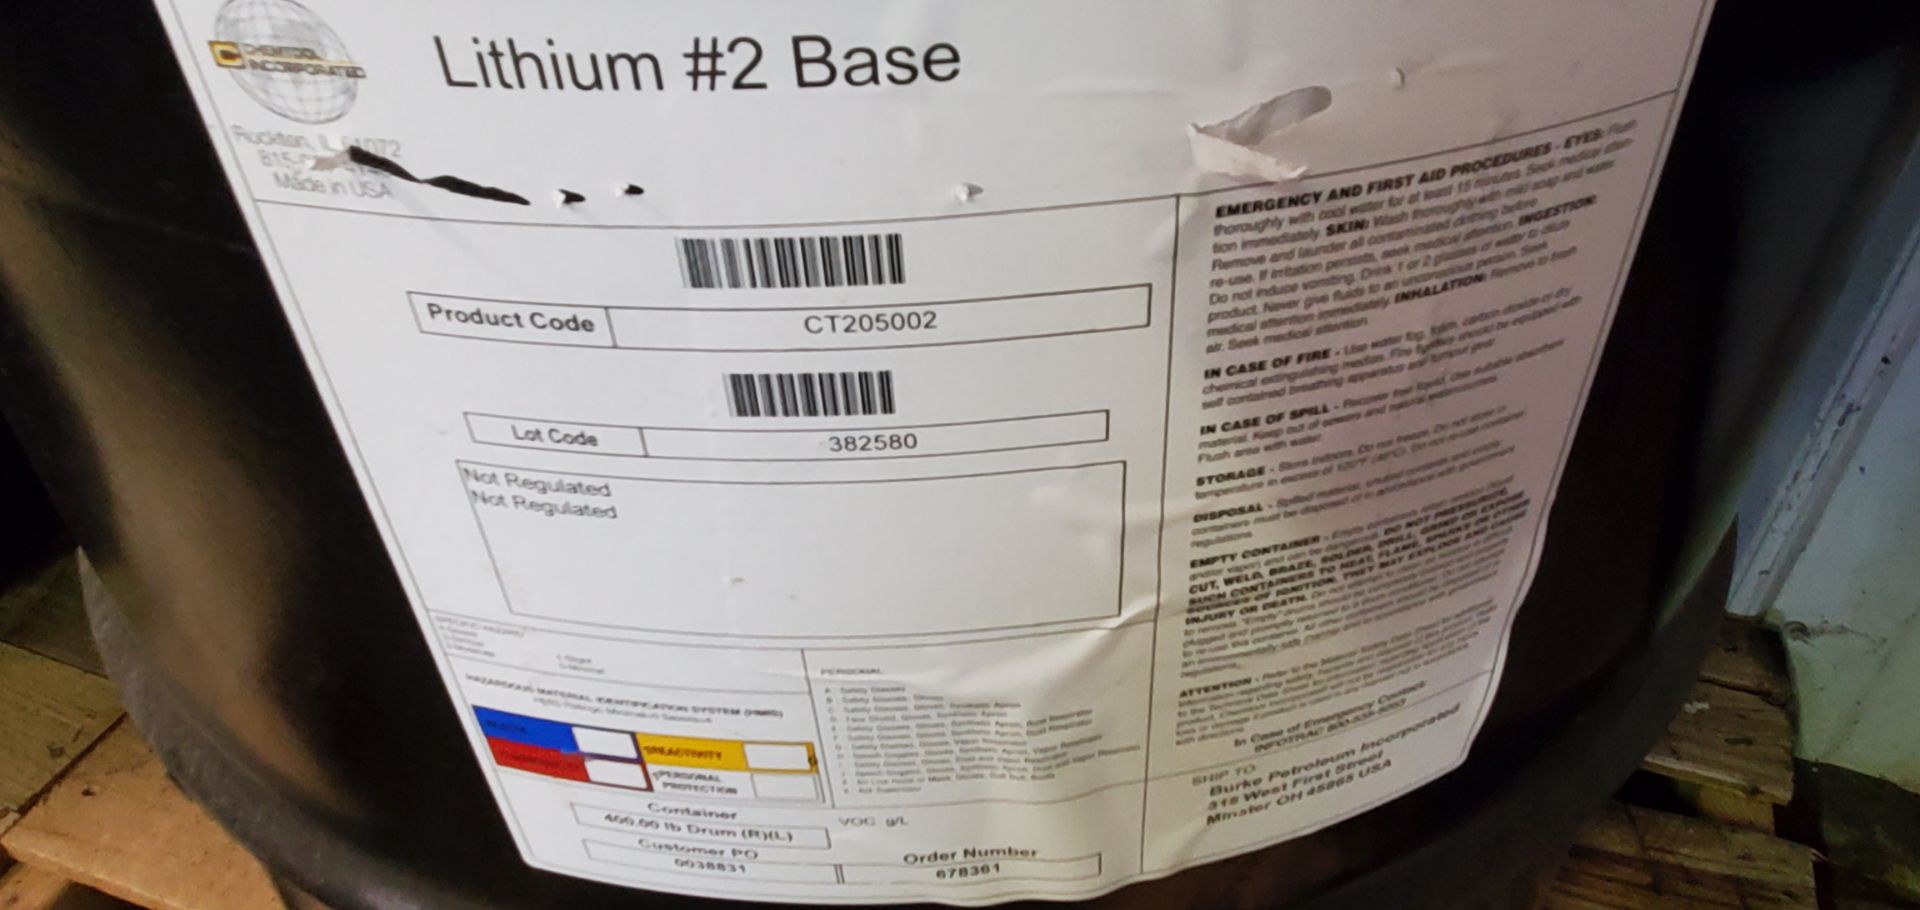 Drum of Lithum #2 Base Grease Product Code CT205002 - Image 2 of 2